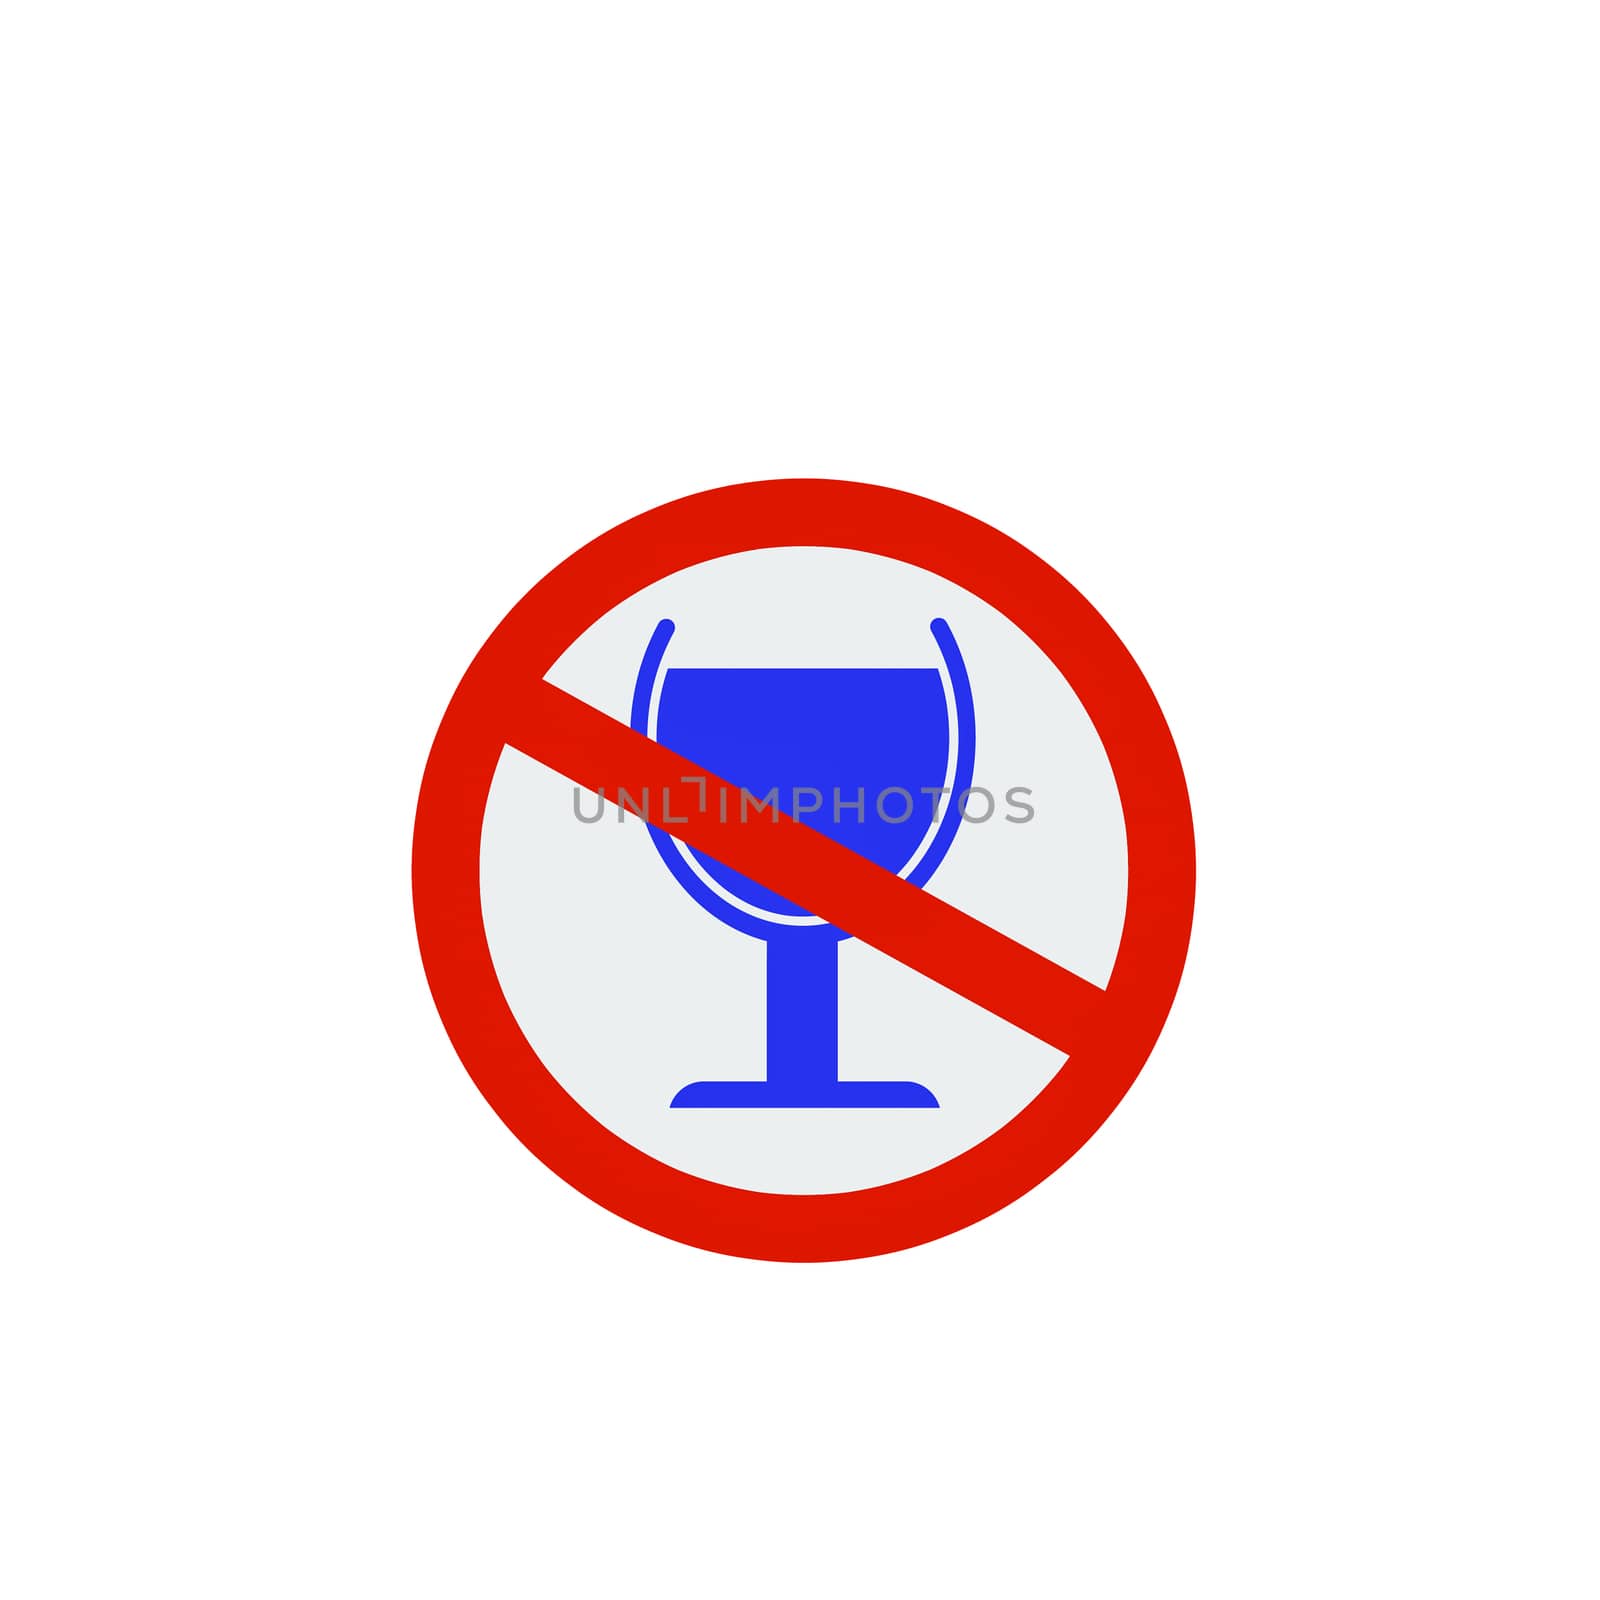 No alcohol drinks icon on white background.Prohibits, Drunk not to drive. by praditlohhana